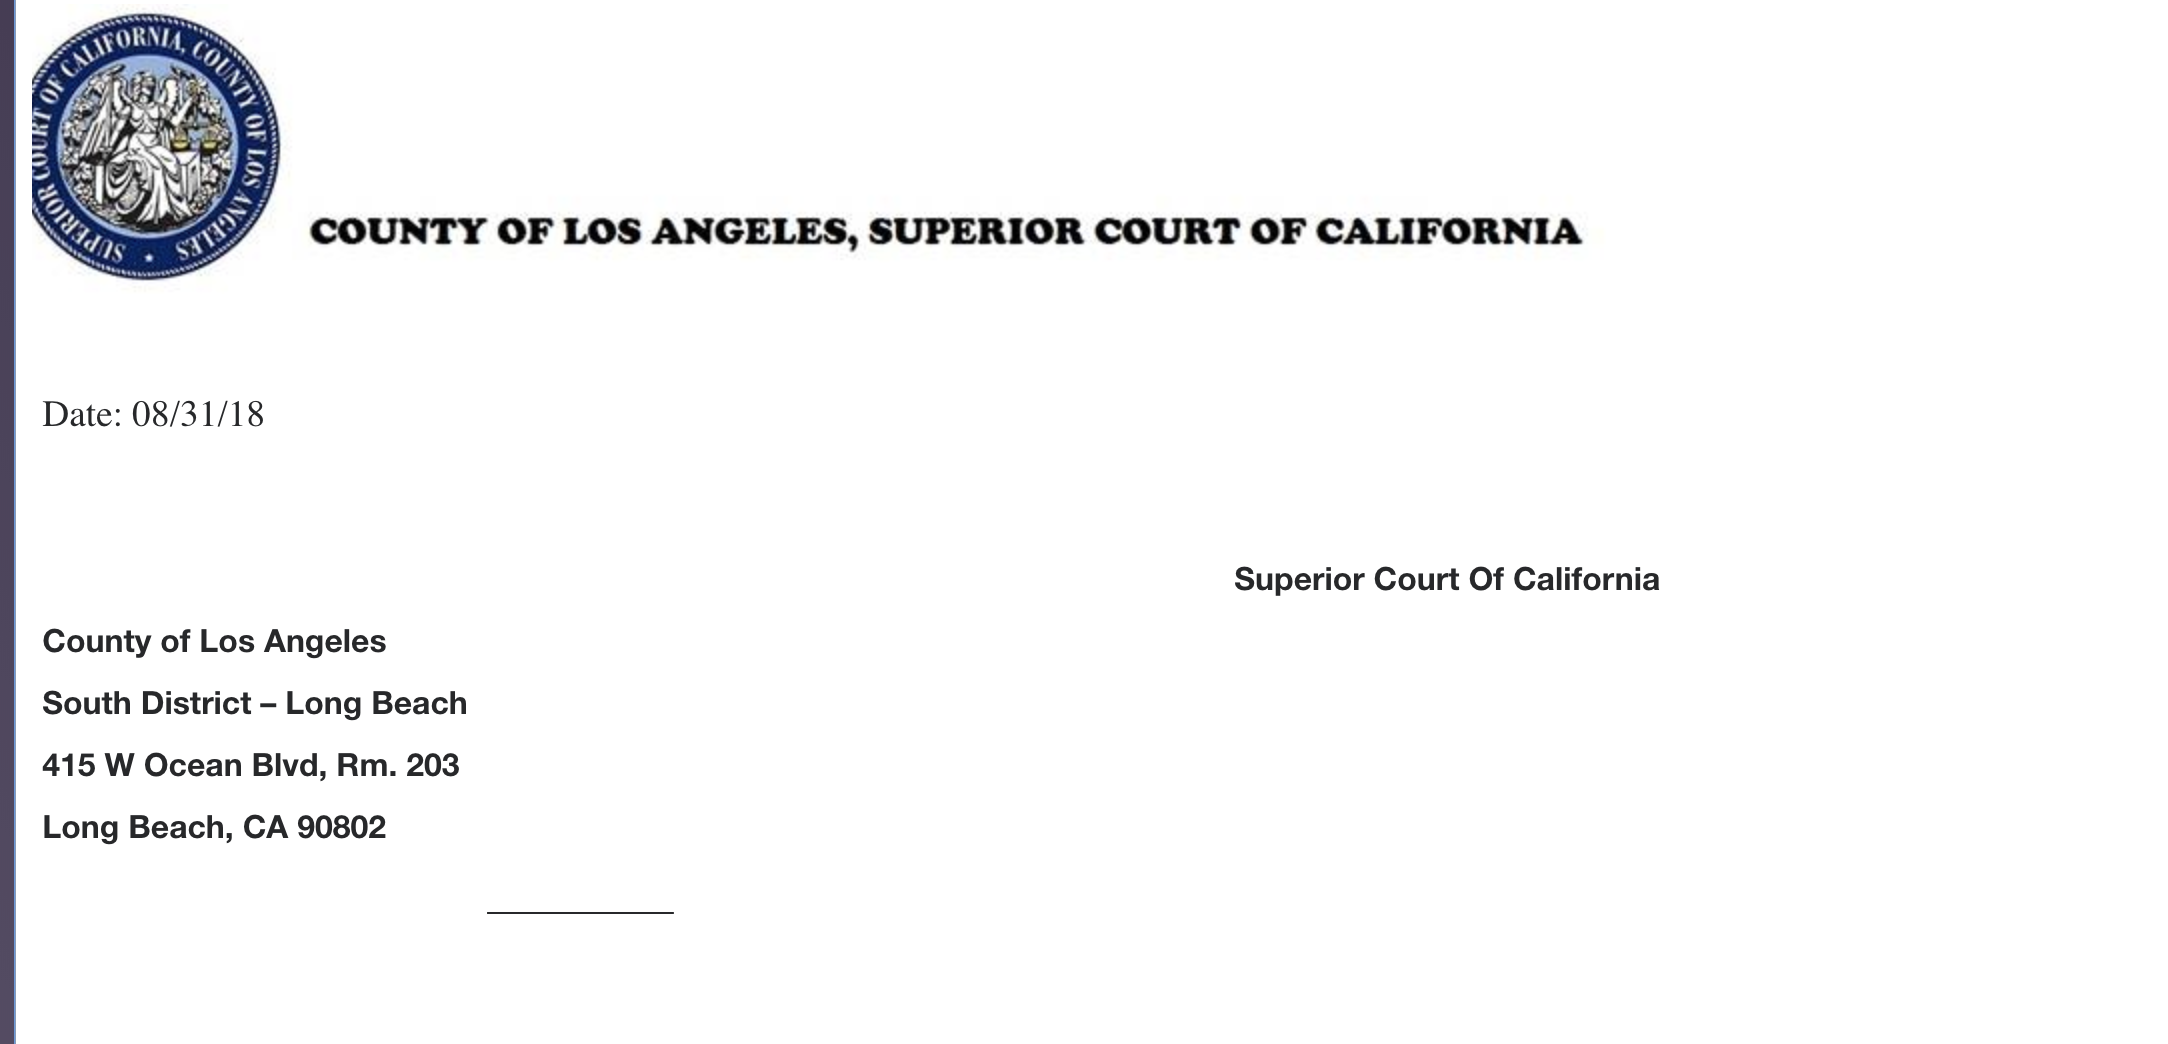  poor alignment on this fake court letterhead